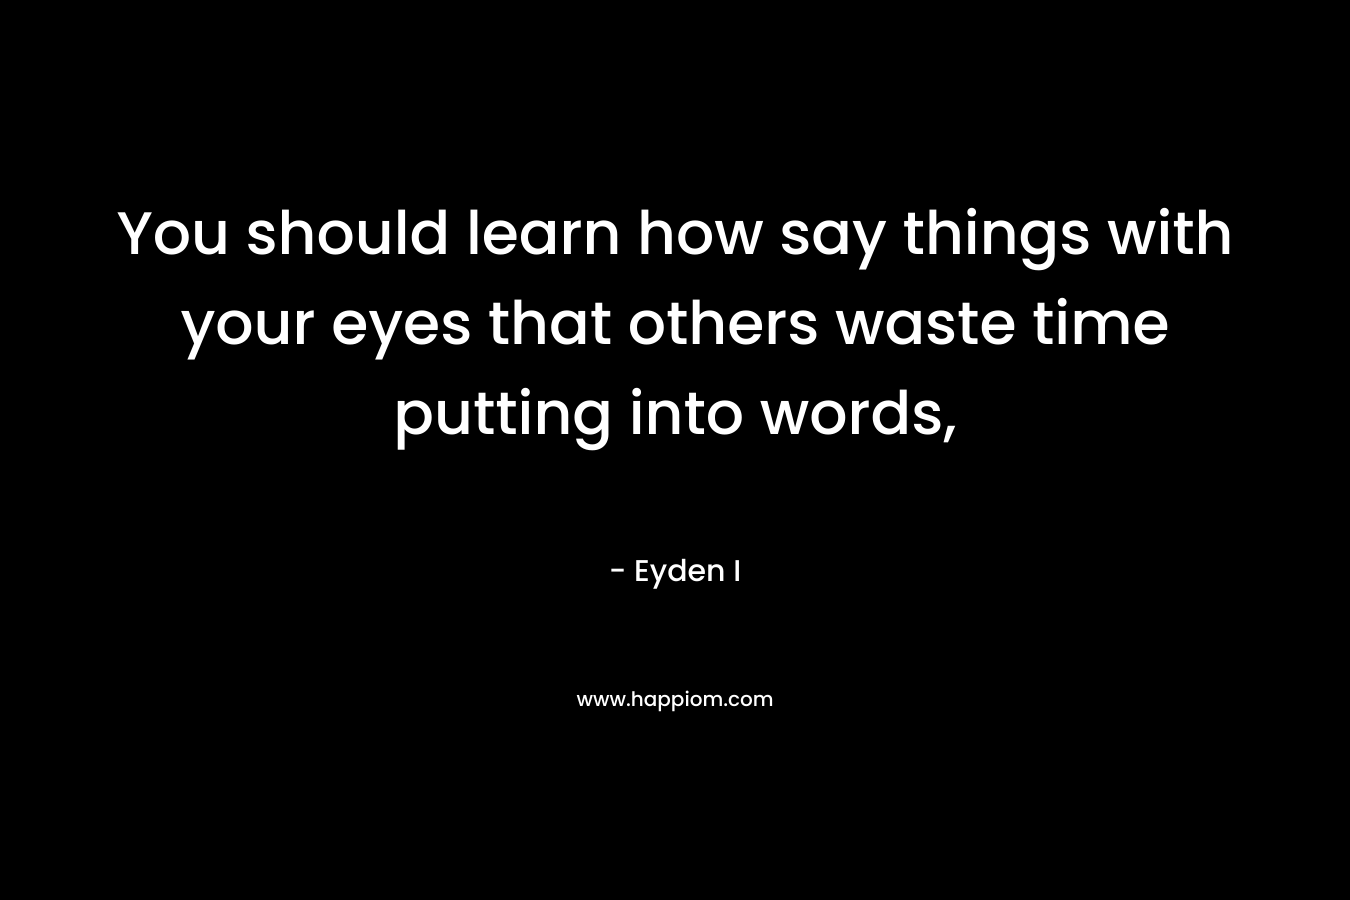 You should learn how say things with your eyes that others waste time putting into words, – Eyden I